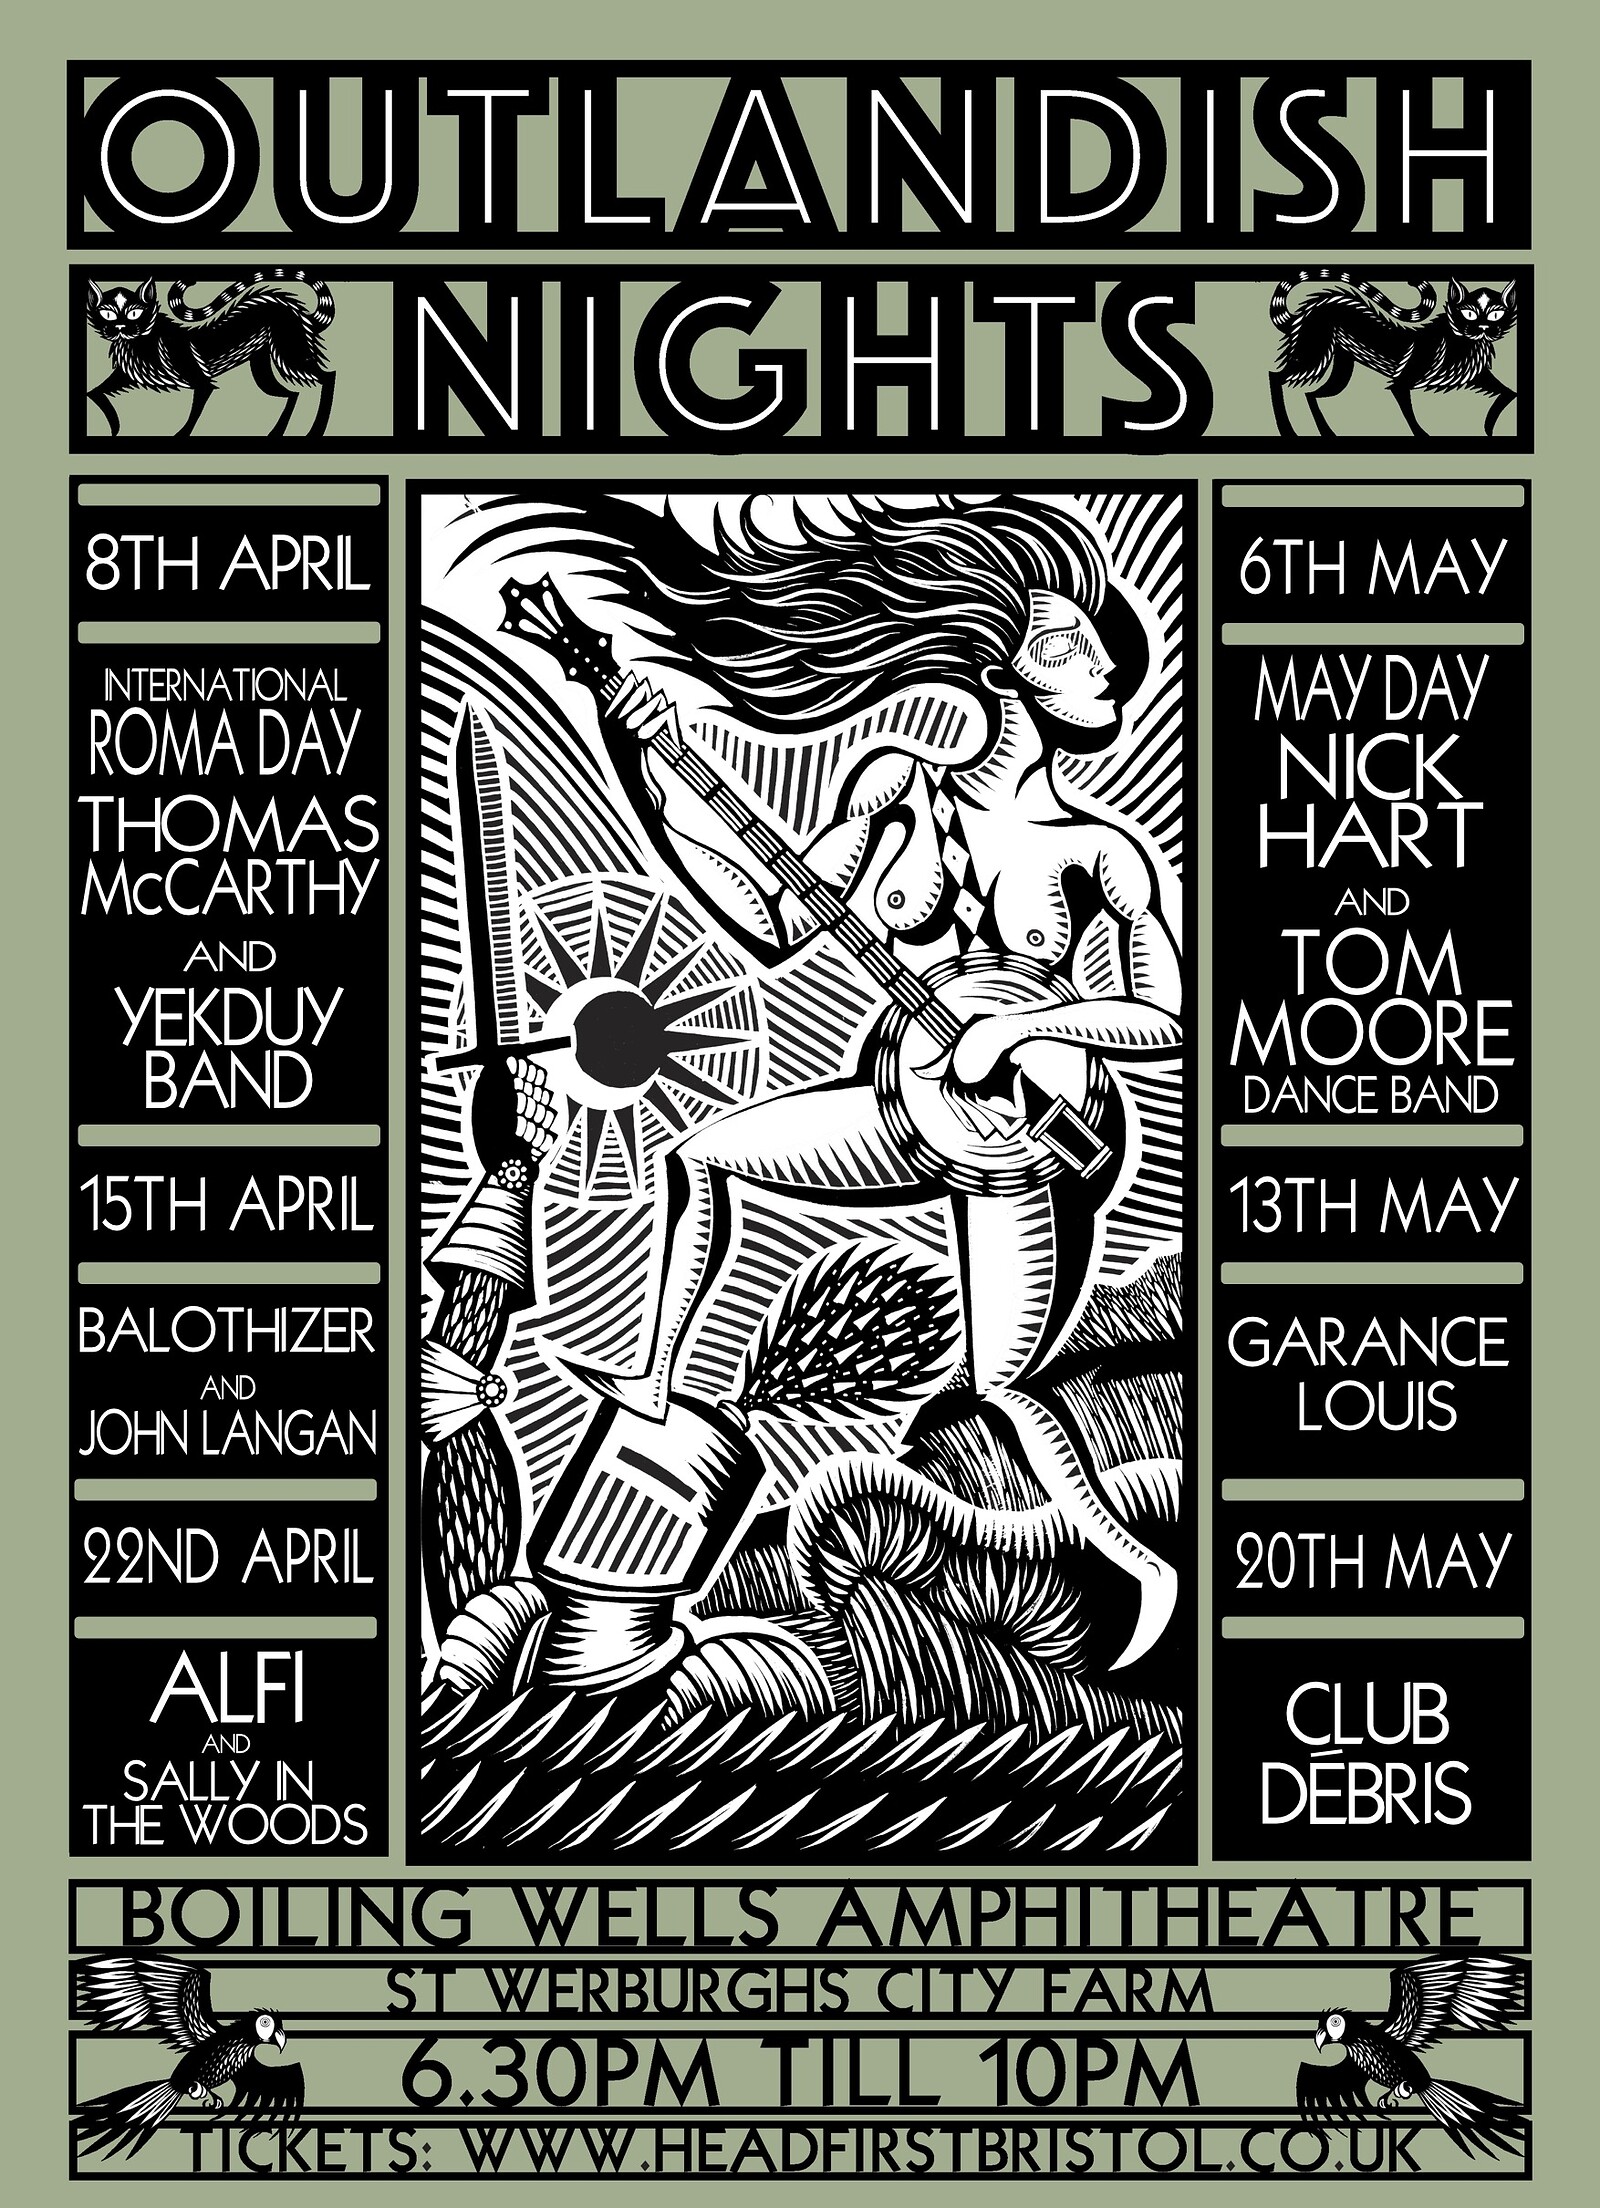 Outlandish Nights:Nick Hart & Tom Moore Dance Band at Boiling Wells Amphitheatre, Boiling Wells Ln, Bristol BS2 9XY